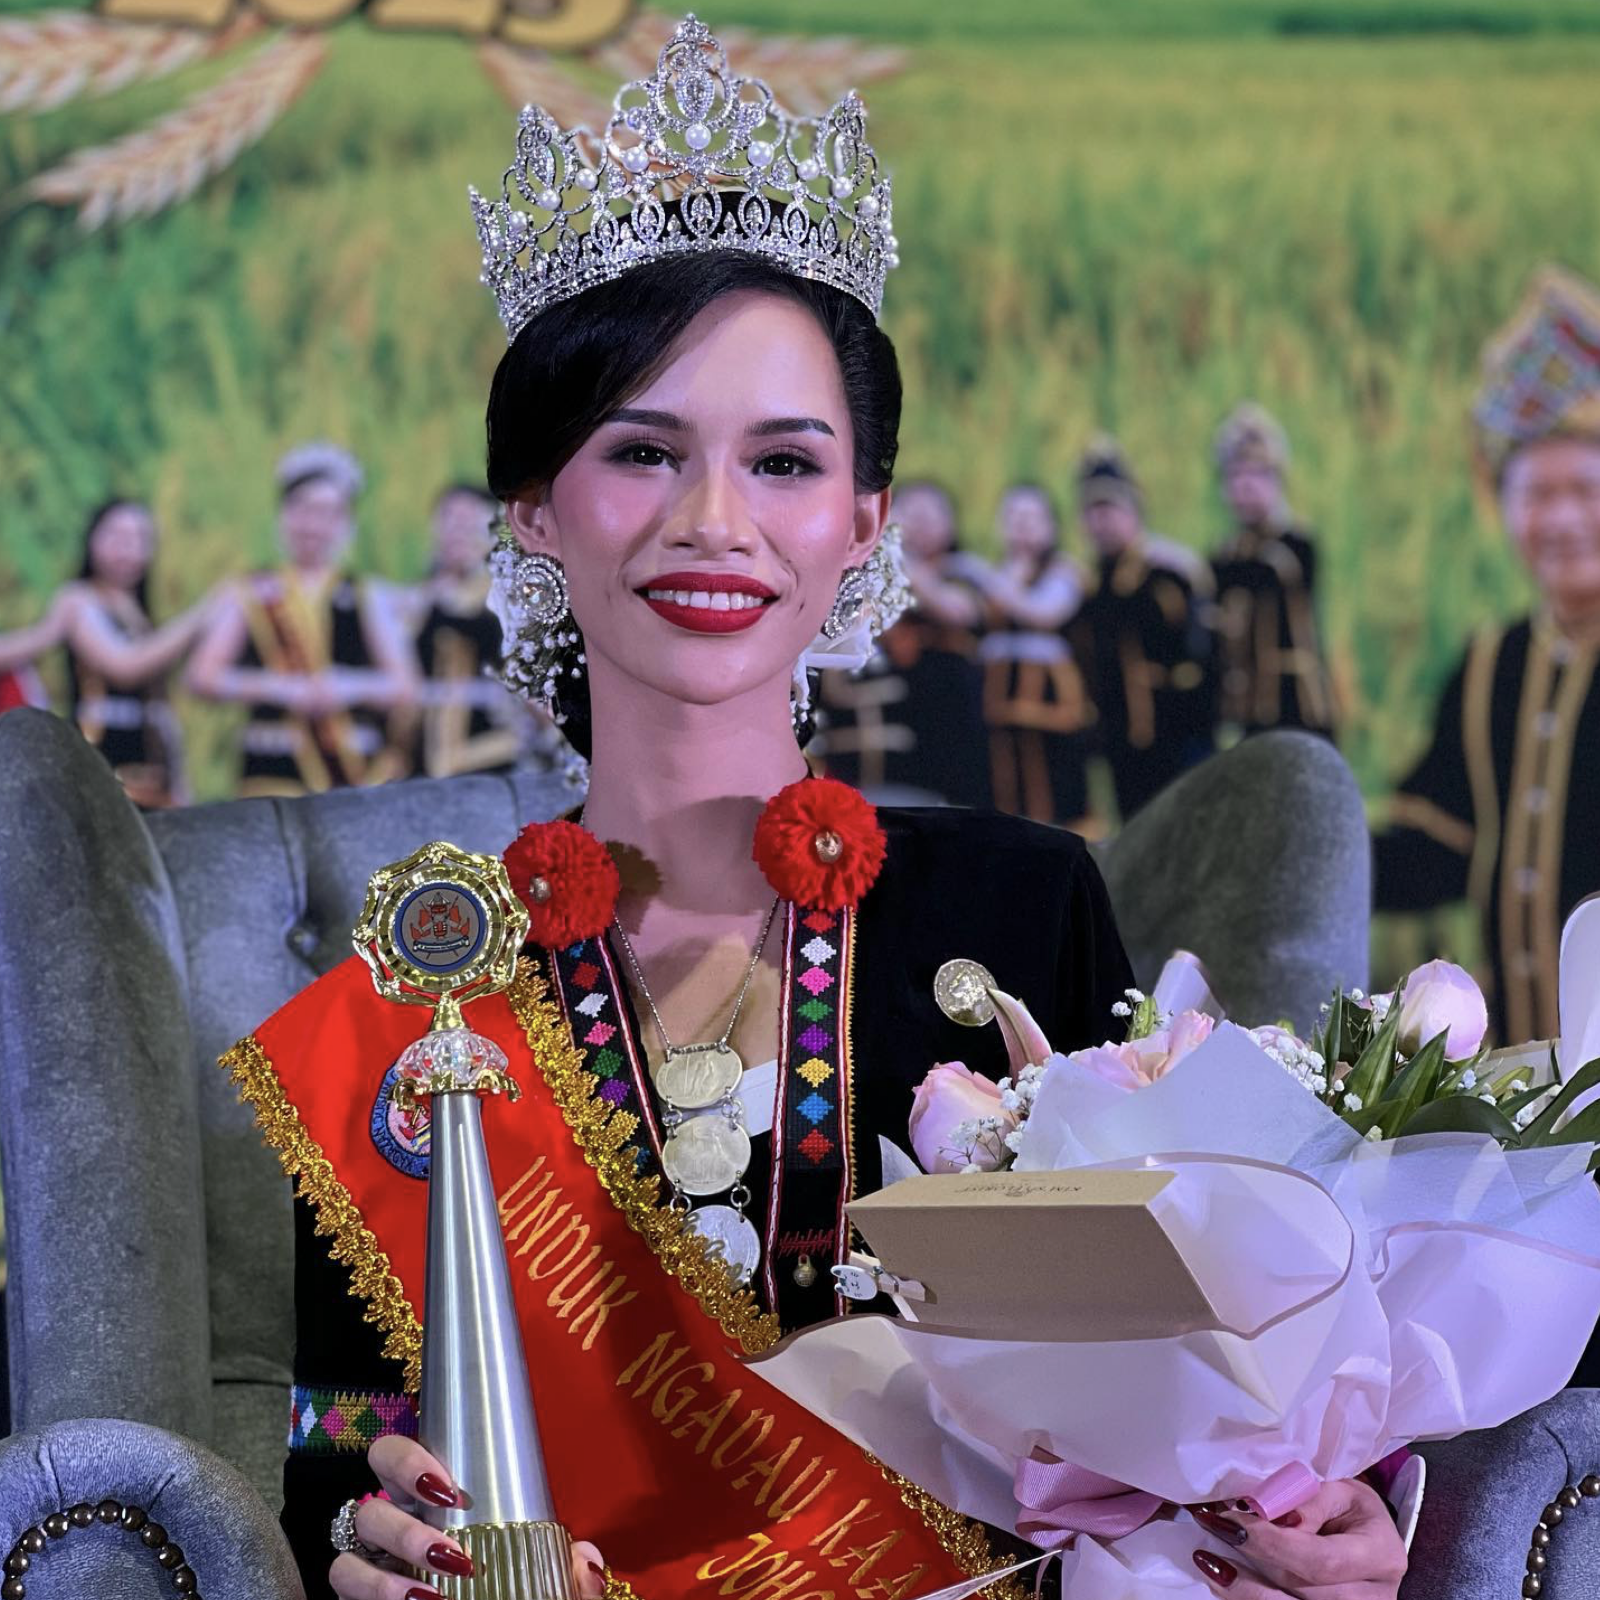 Malaysia's beauty queen was stripped of her title for ''wild dancing'' with half-naked men in Thailand. Photo.